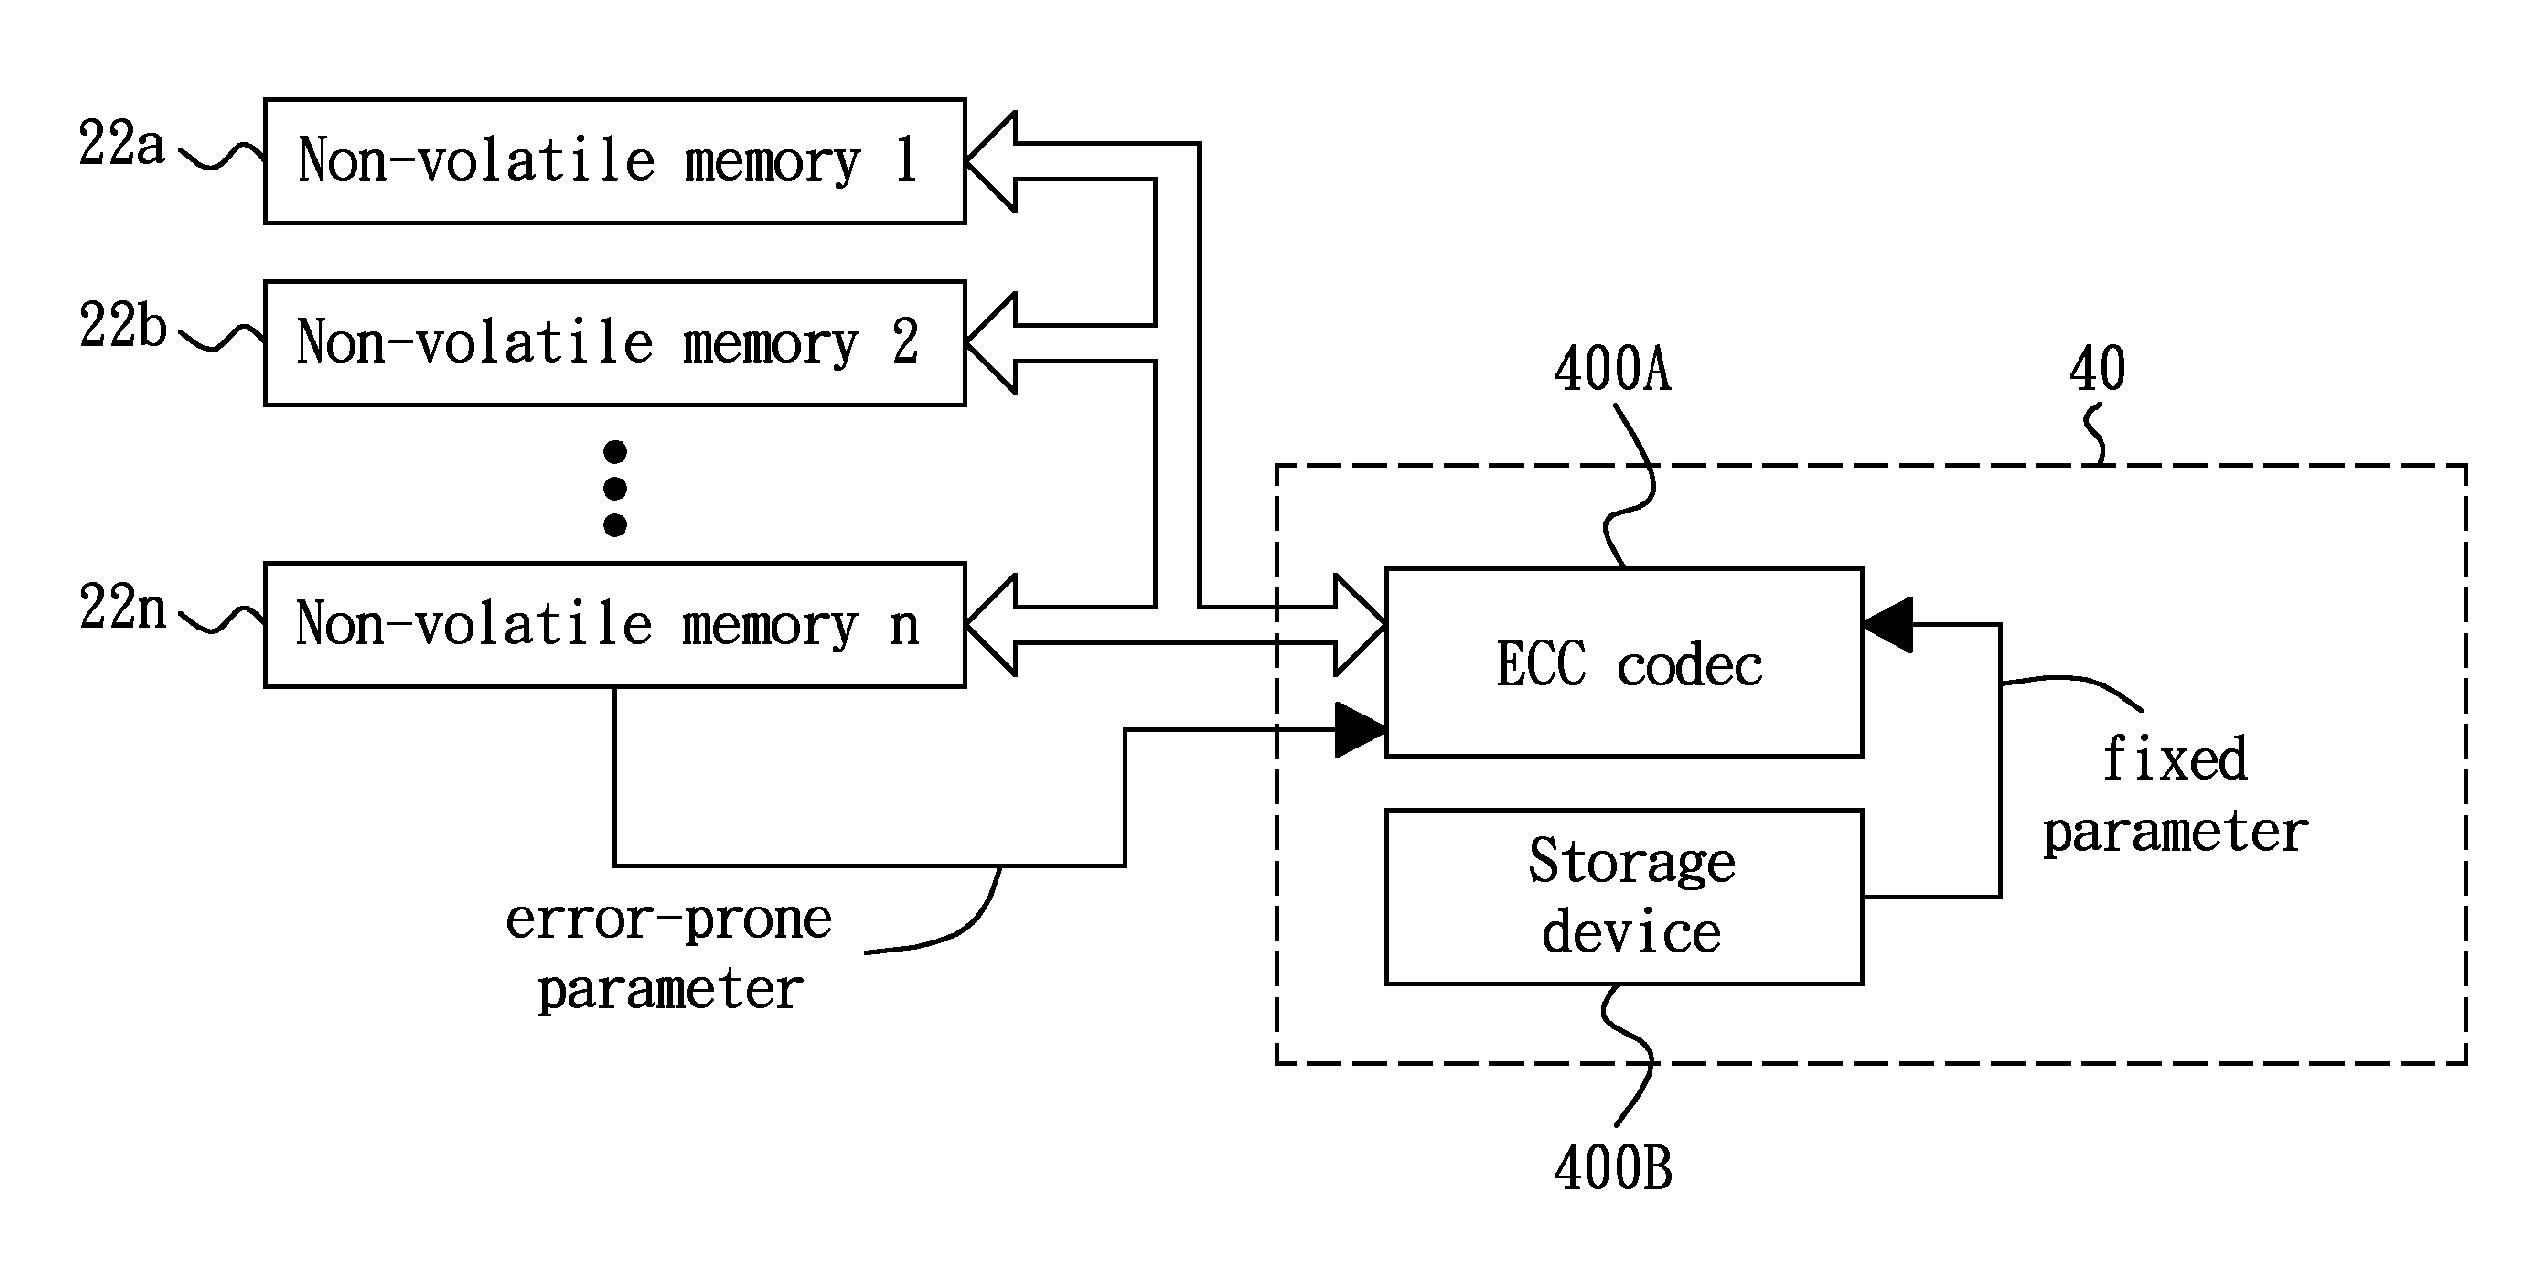 Configurable coding system and method of multiple ECCS